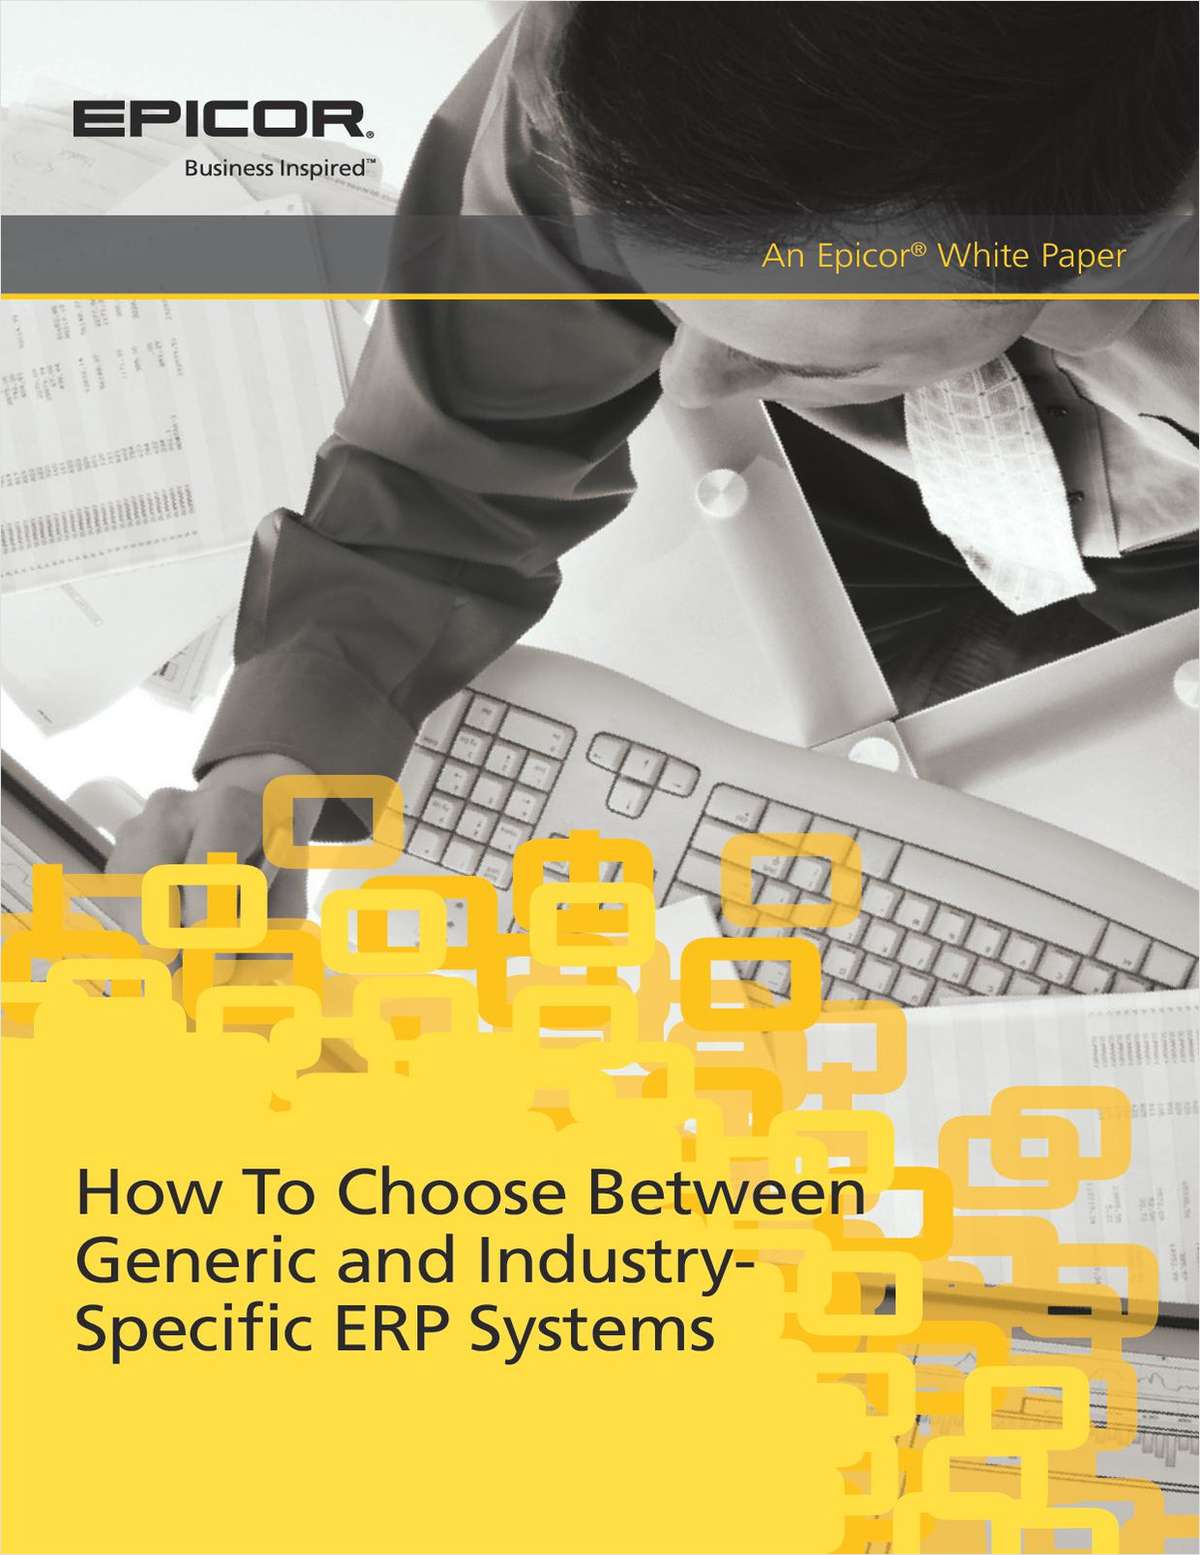 How To Choose Between Generic and Industry-Specific ERP Systems